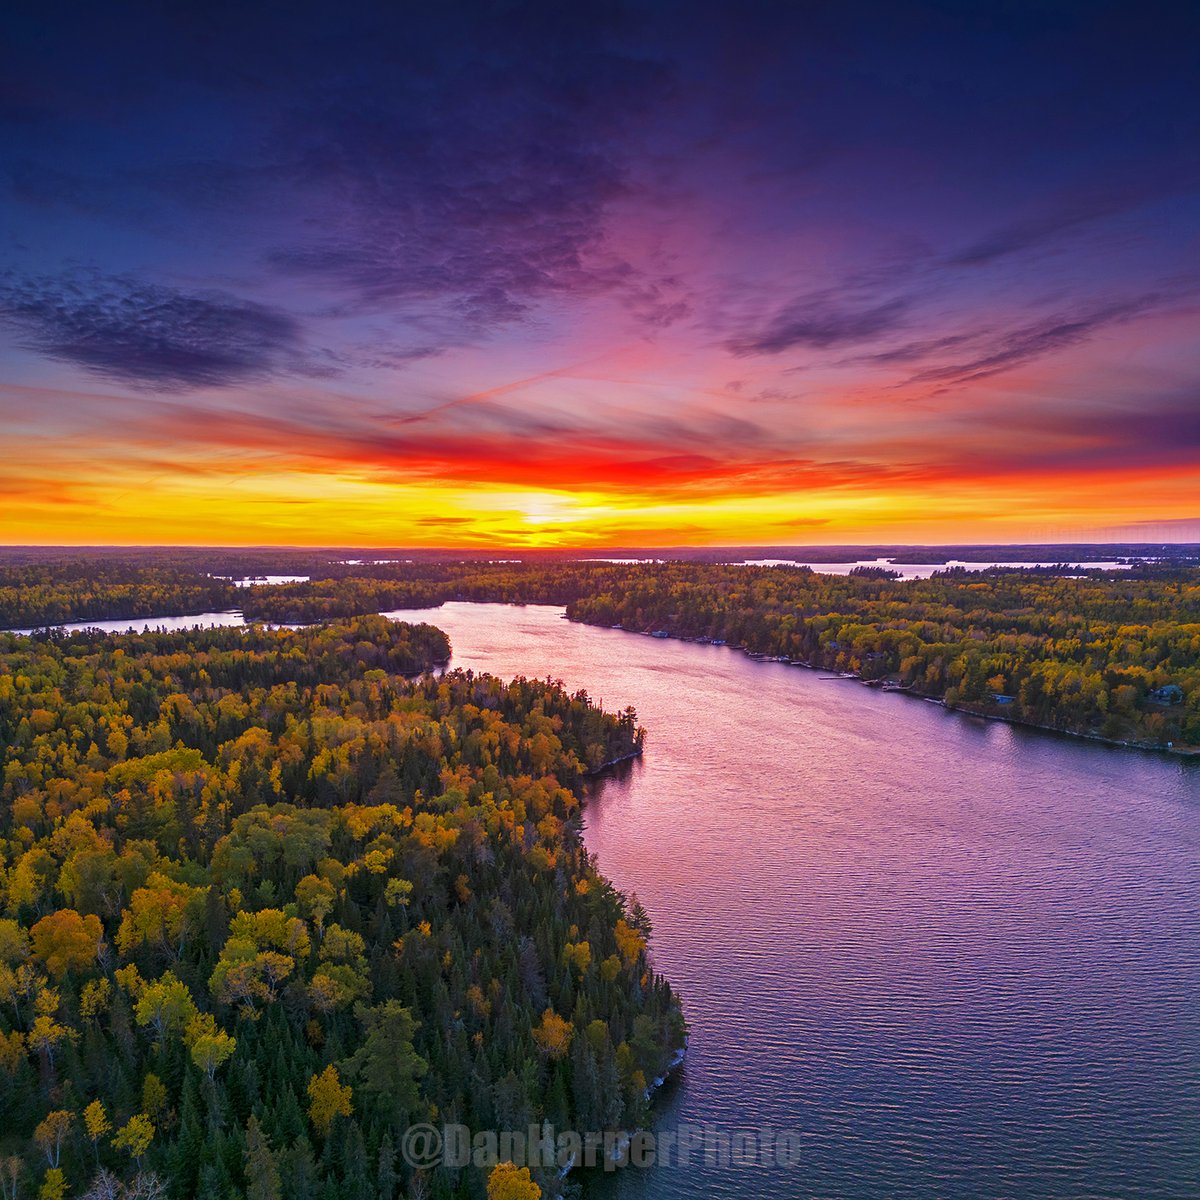 Positive vibes only from this #sunset shot in #Kenora 
#LakeOfTheWoods #Drone #WinnipegPhotographer #AerialView  #DronePhotography #GoldenHour  #LakeOfTheWoodsLiving #RPAS #LicensedDronePilot